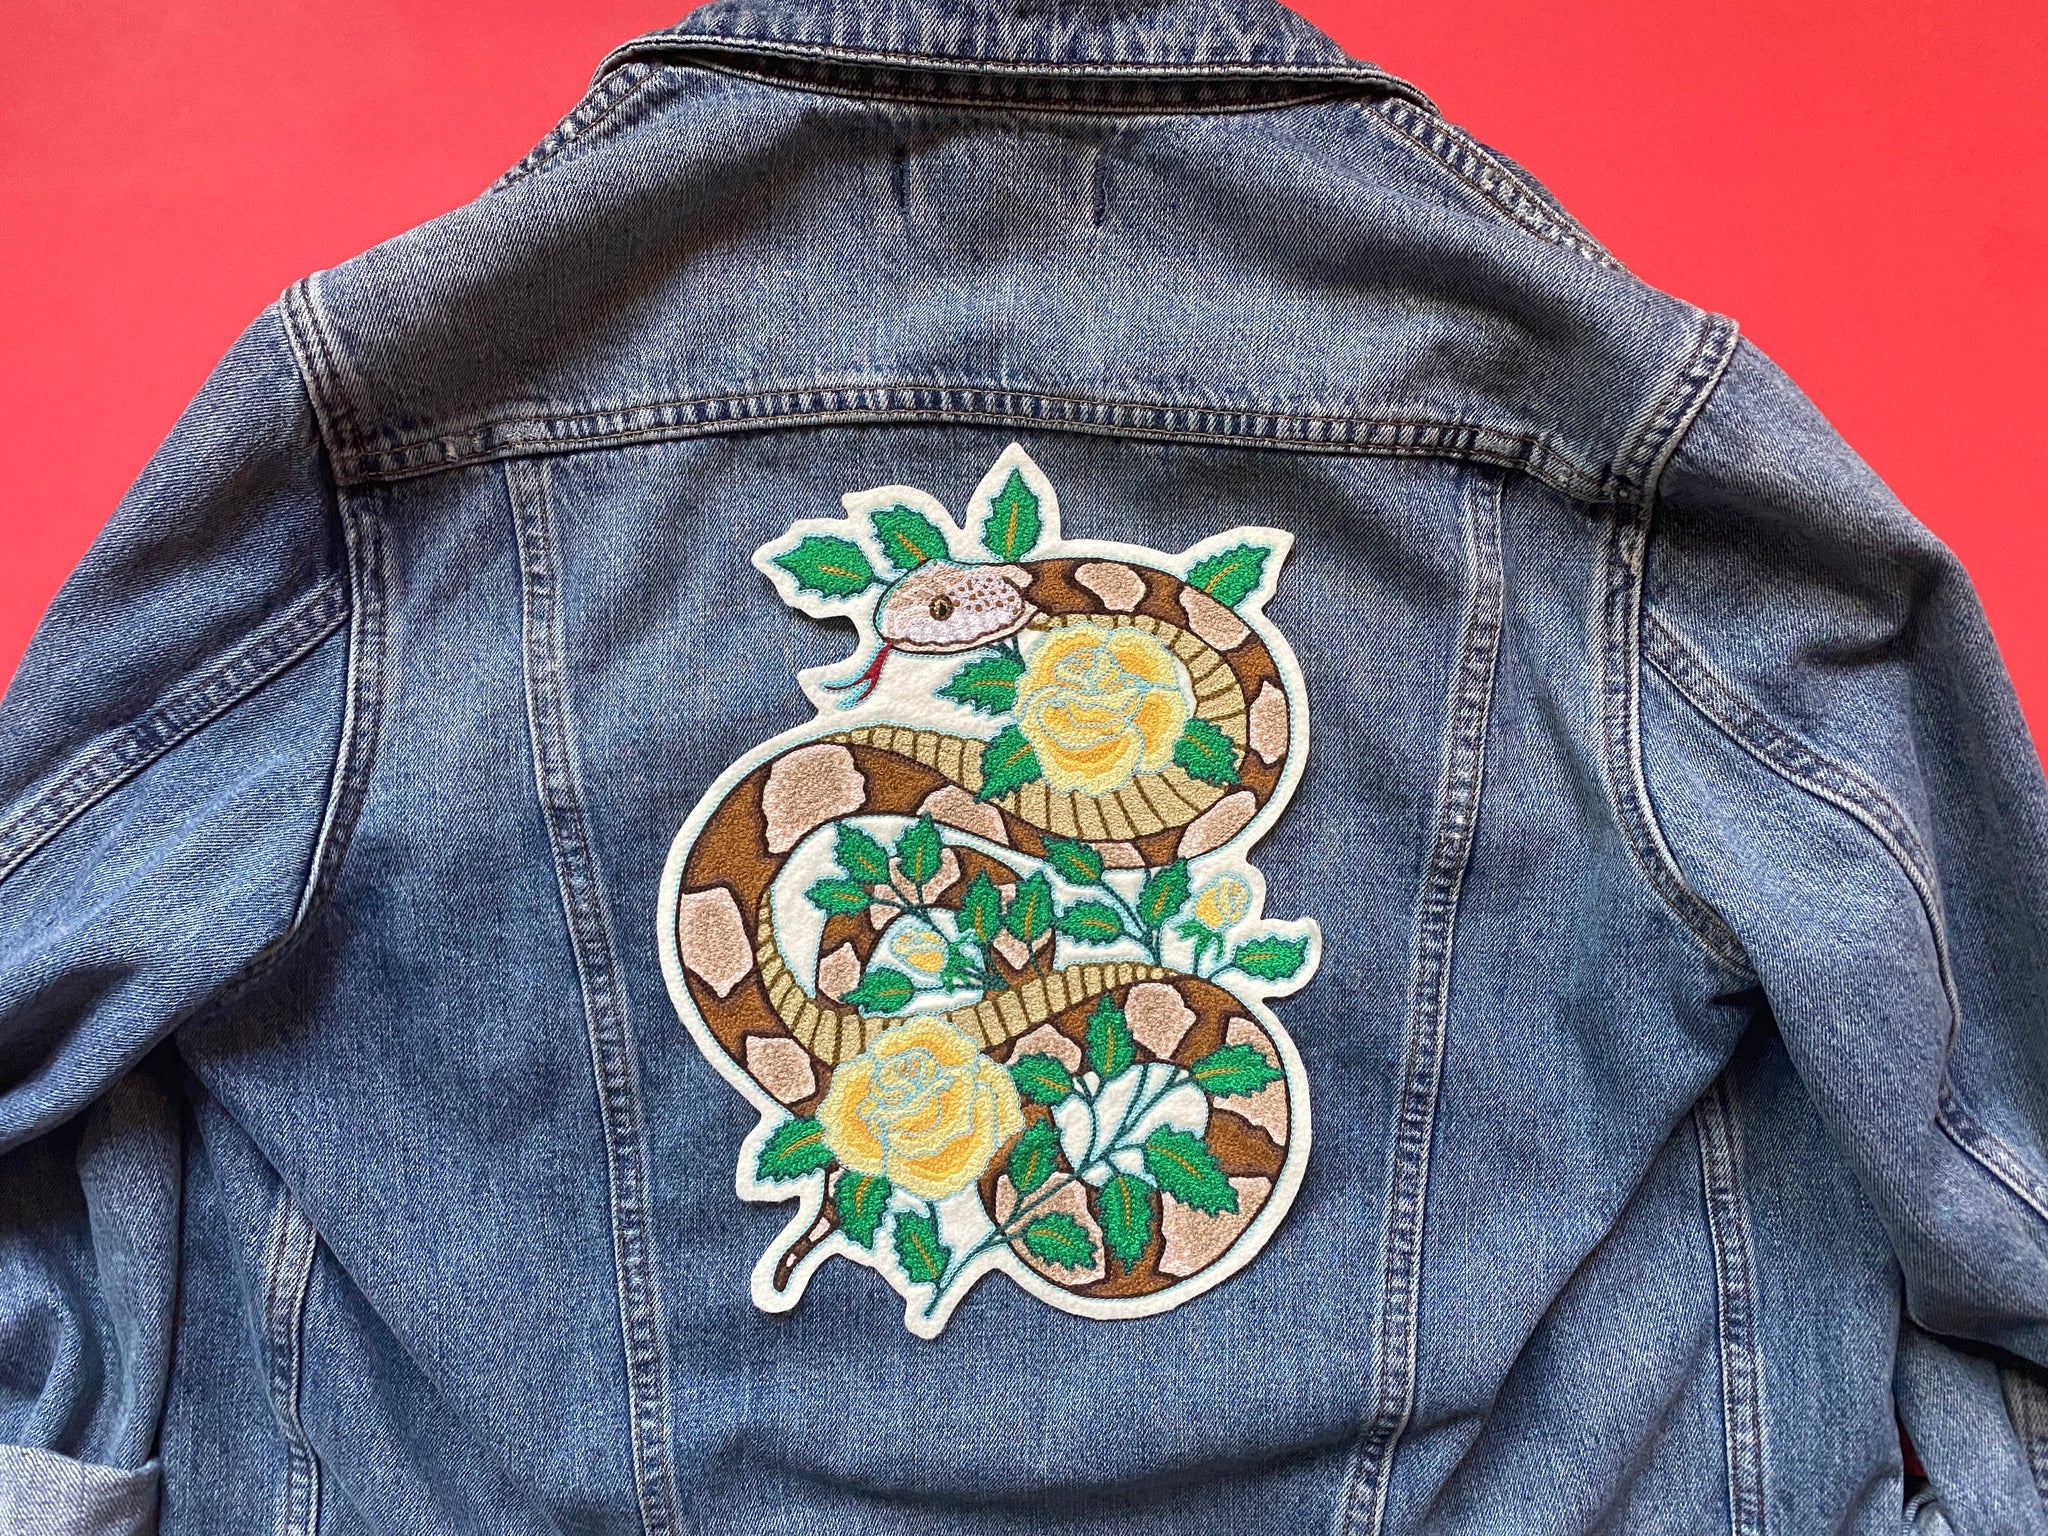 Wild small flowers peek a boo patches for denim holes